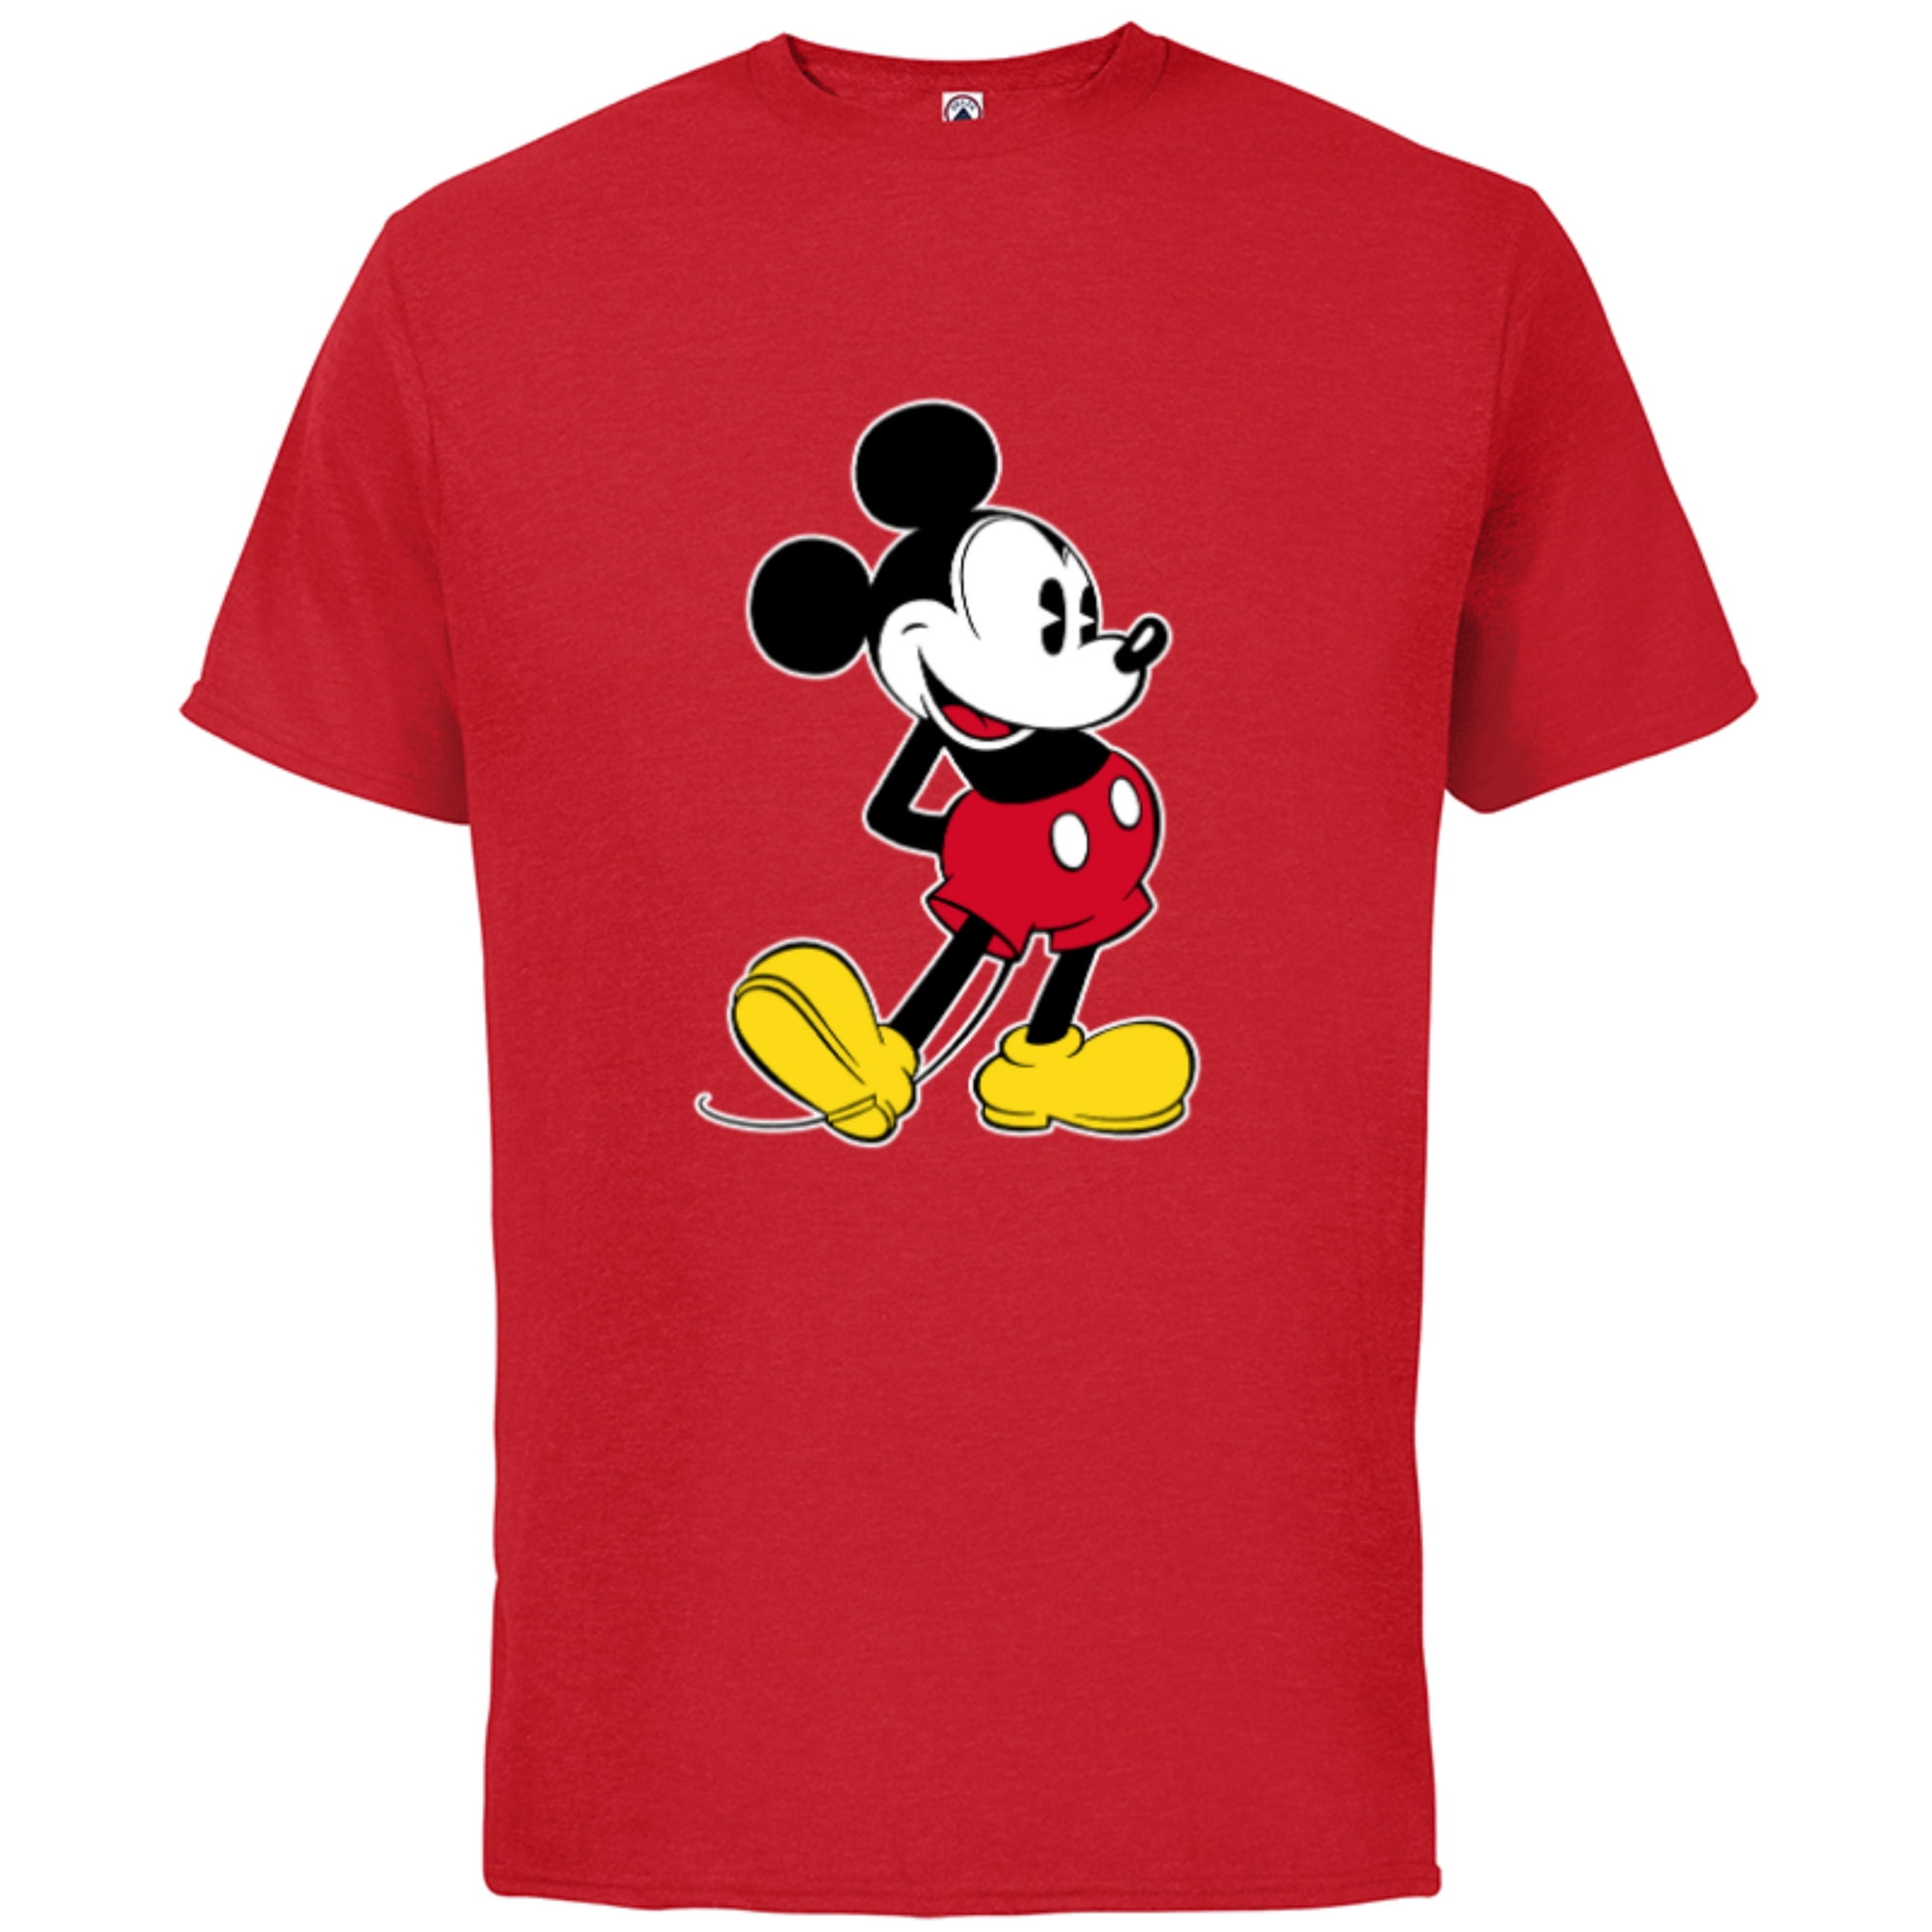 - Customized-Athletic Adults- Classic Cotton Short Heather Disney Sleeve Mouse Mickey Pose for T-Shirt